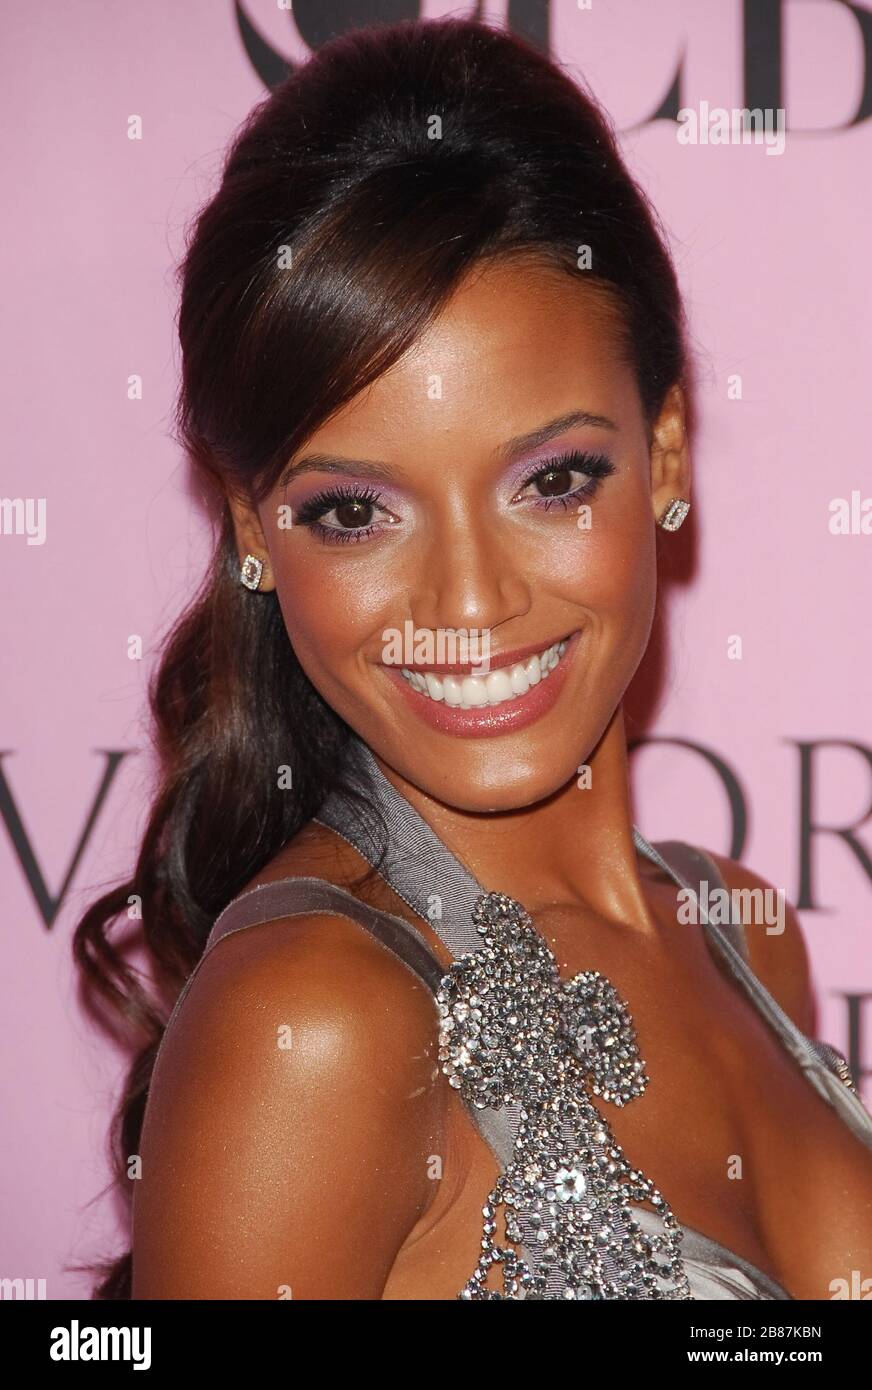 Selita Ebanks at the Victoria's Secret Fashion Show - Arrivals held at the Kodak Theater in Hollywood, CA. The event took place on Thursday, November 16, 2006.  Photo by: SBM / PictureLux - File Reference # 33984-9561SBMPLX Stock Photo